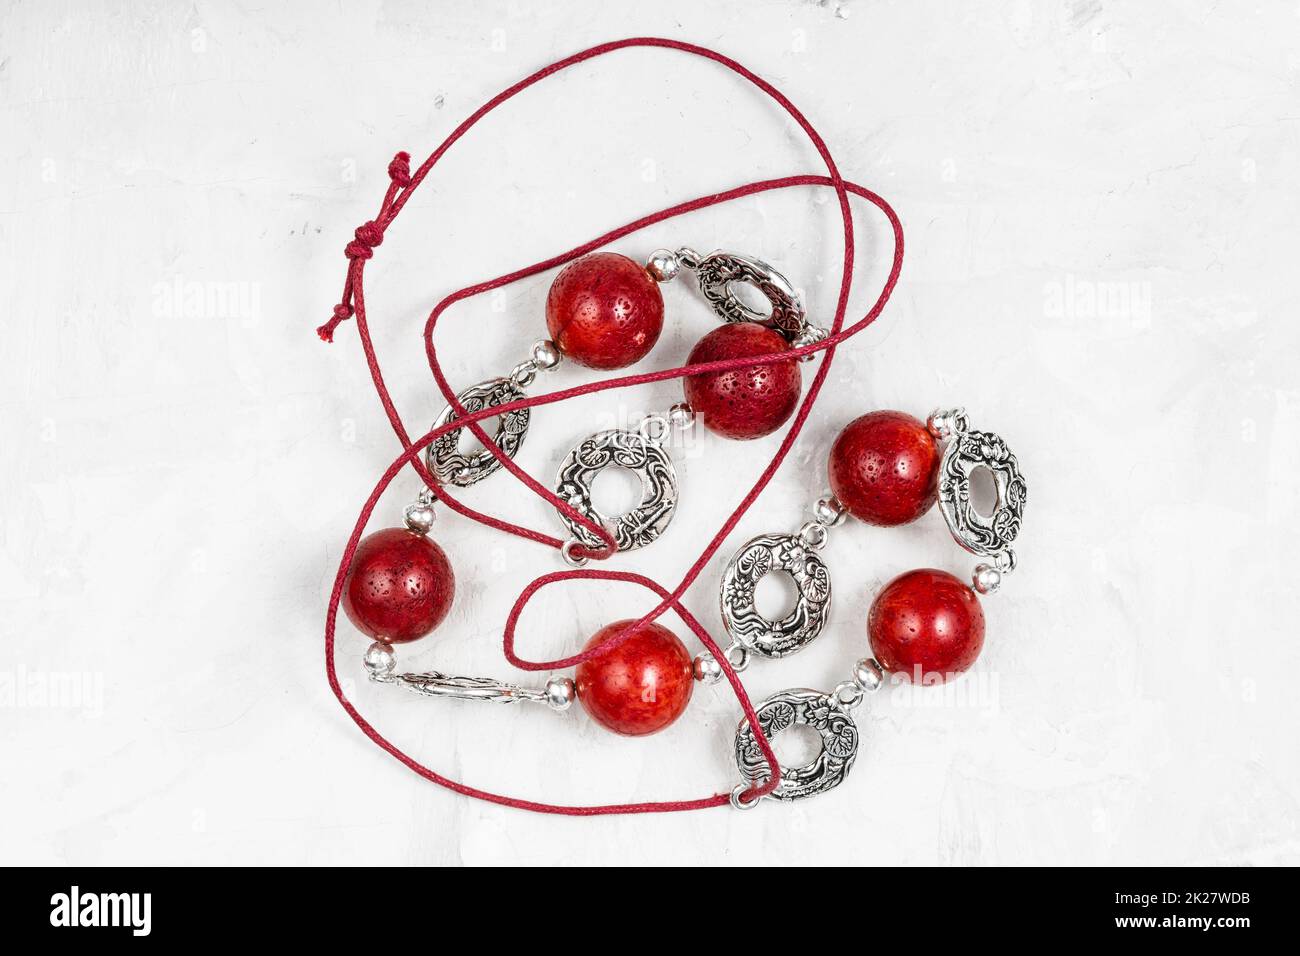 tangled necklace of red coral balls on gray Stock Photo